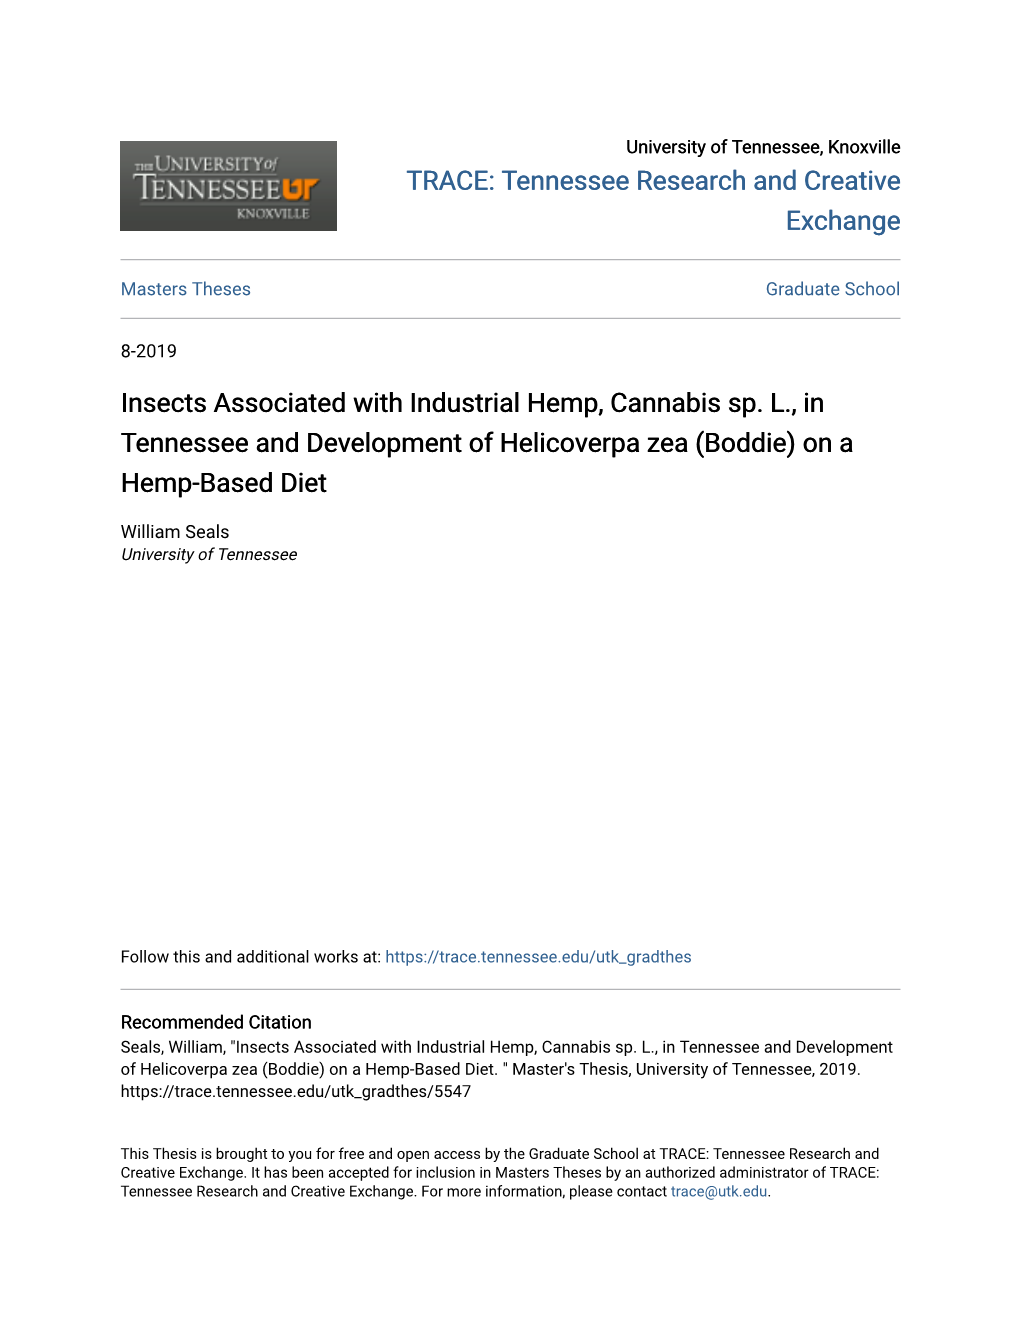 Insects Associated with Industrial Hemp, Cannabis Sp. L., in Tennessee and Development of Helicoverpa Zea (Boddie) on a Hemp-Based Diet